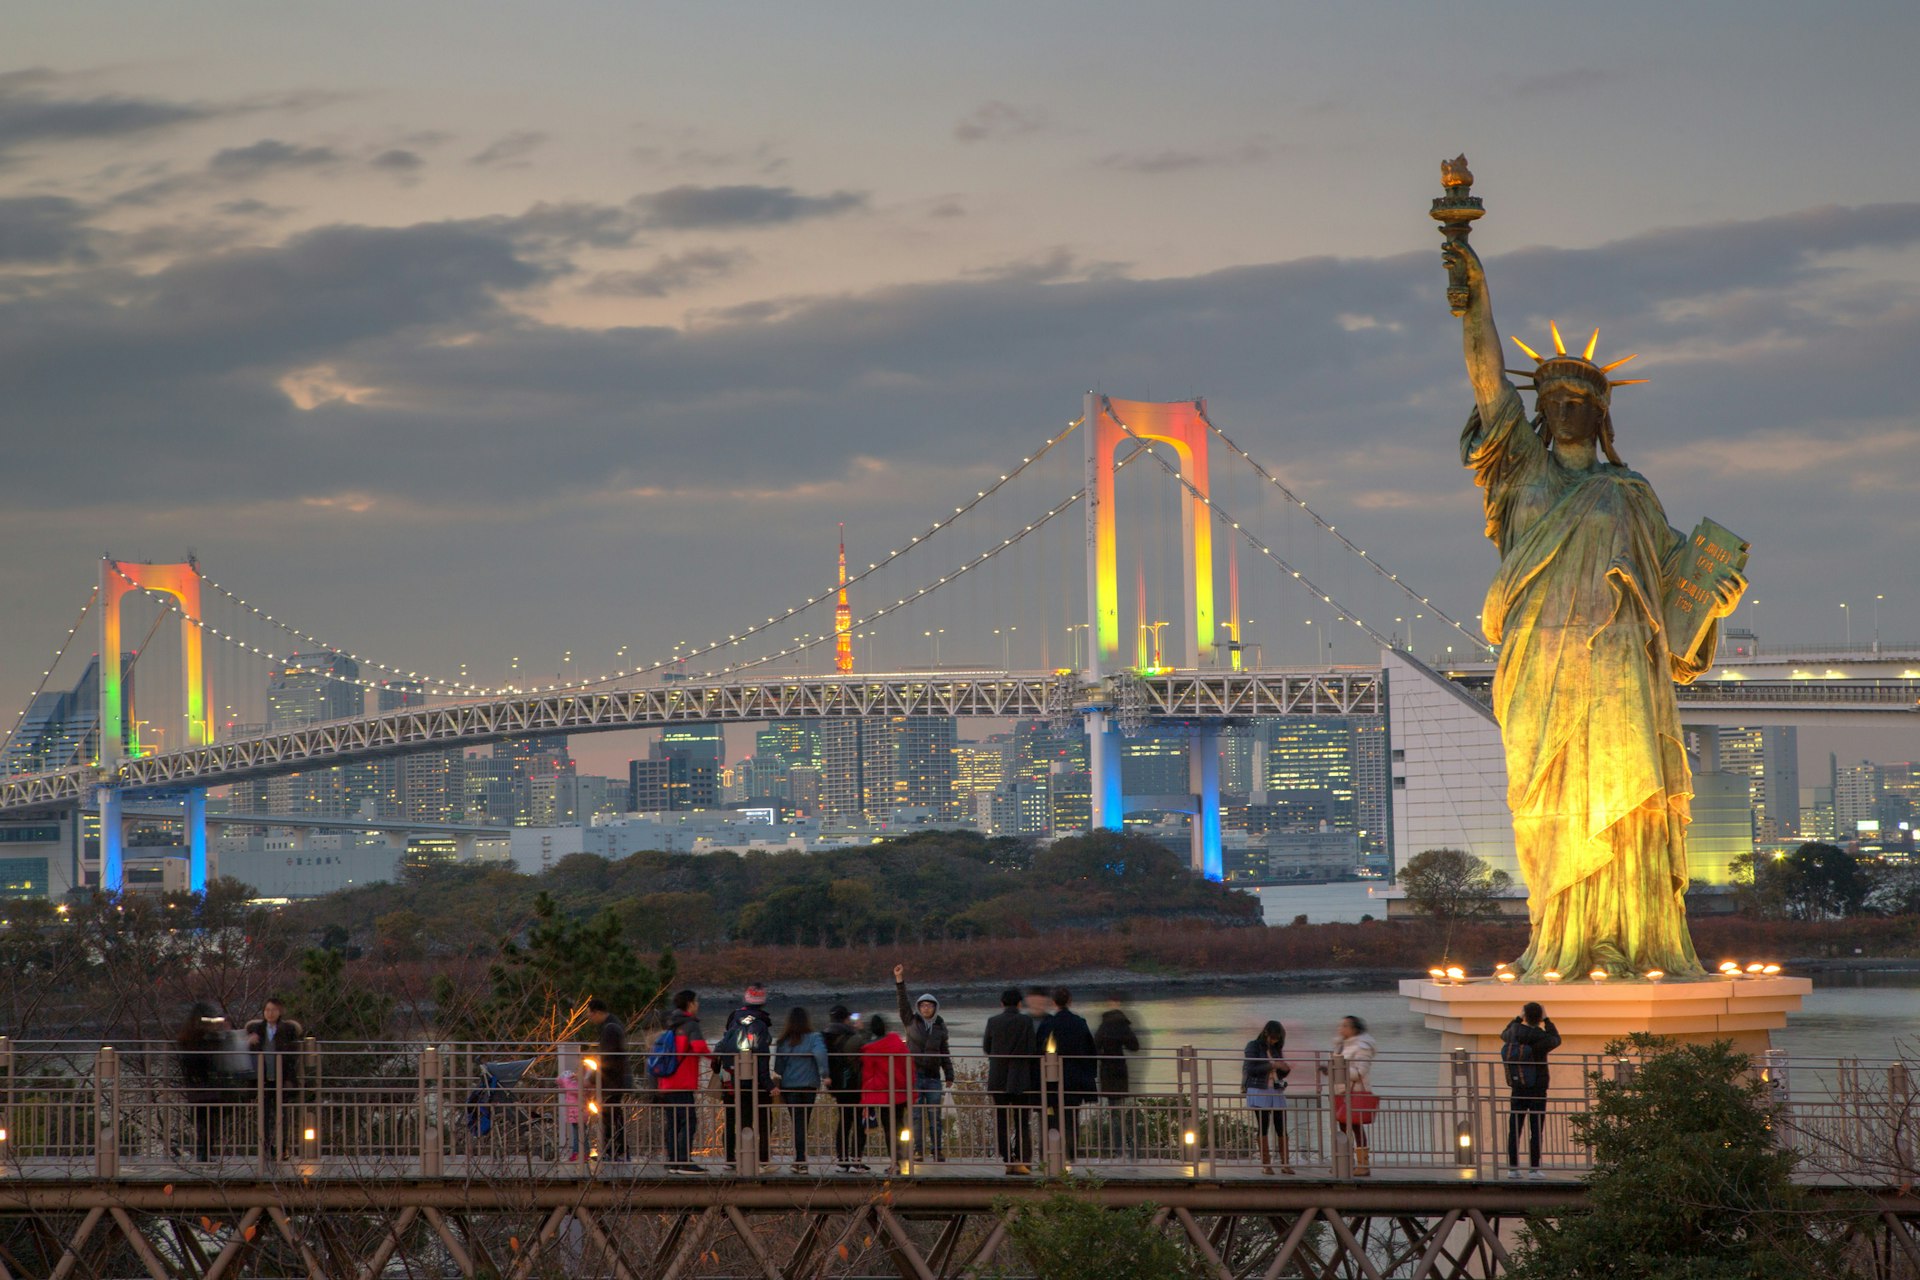 People stand on a platform admiring a suspension bridge in the background it in rainbow colors. A replica Statue of Liberty stands in the foreground